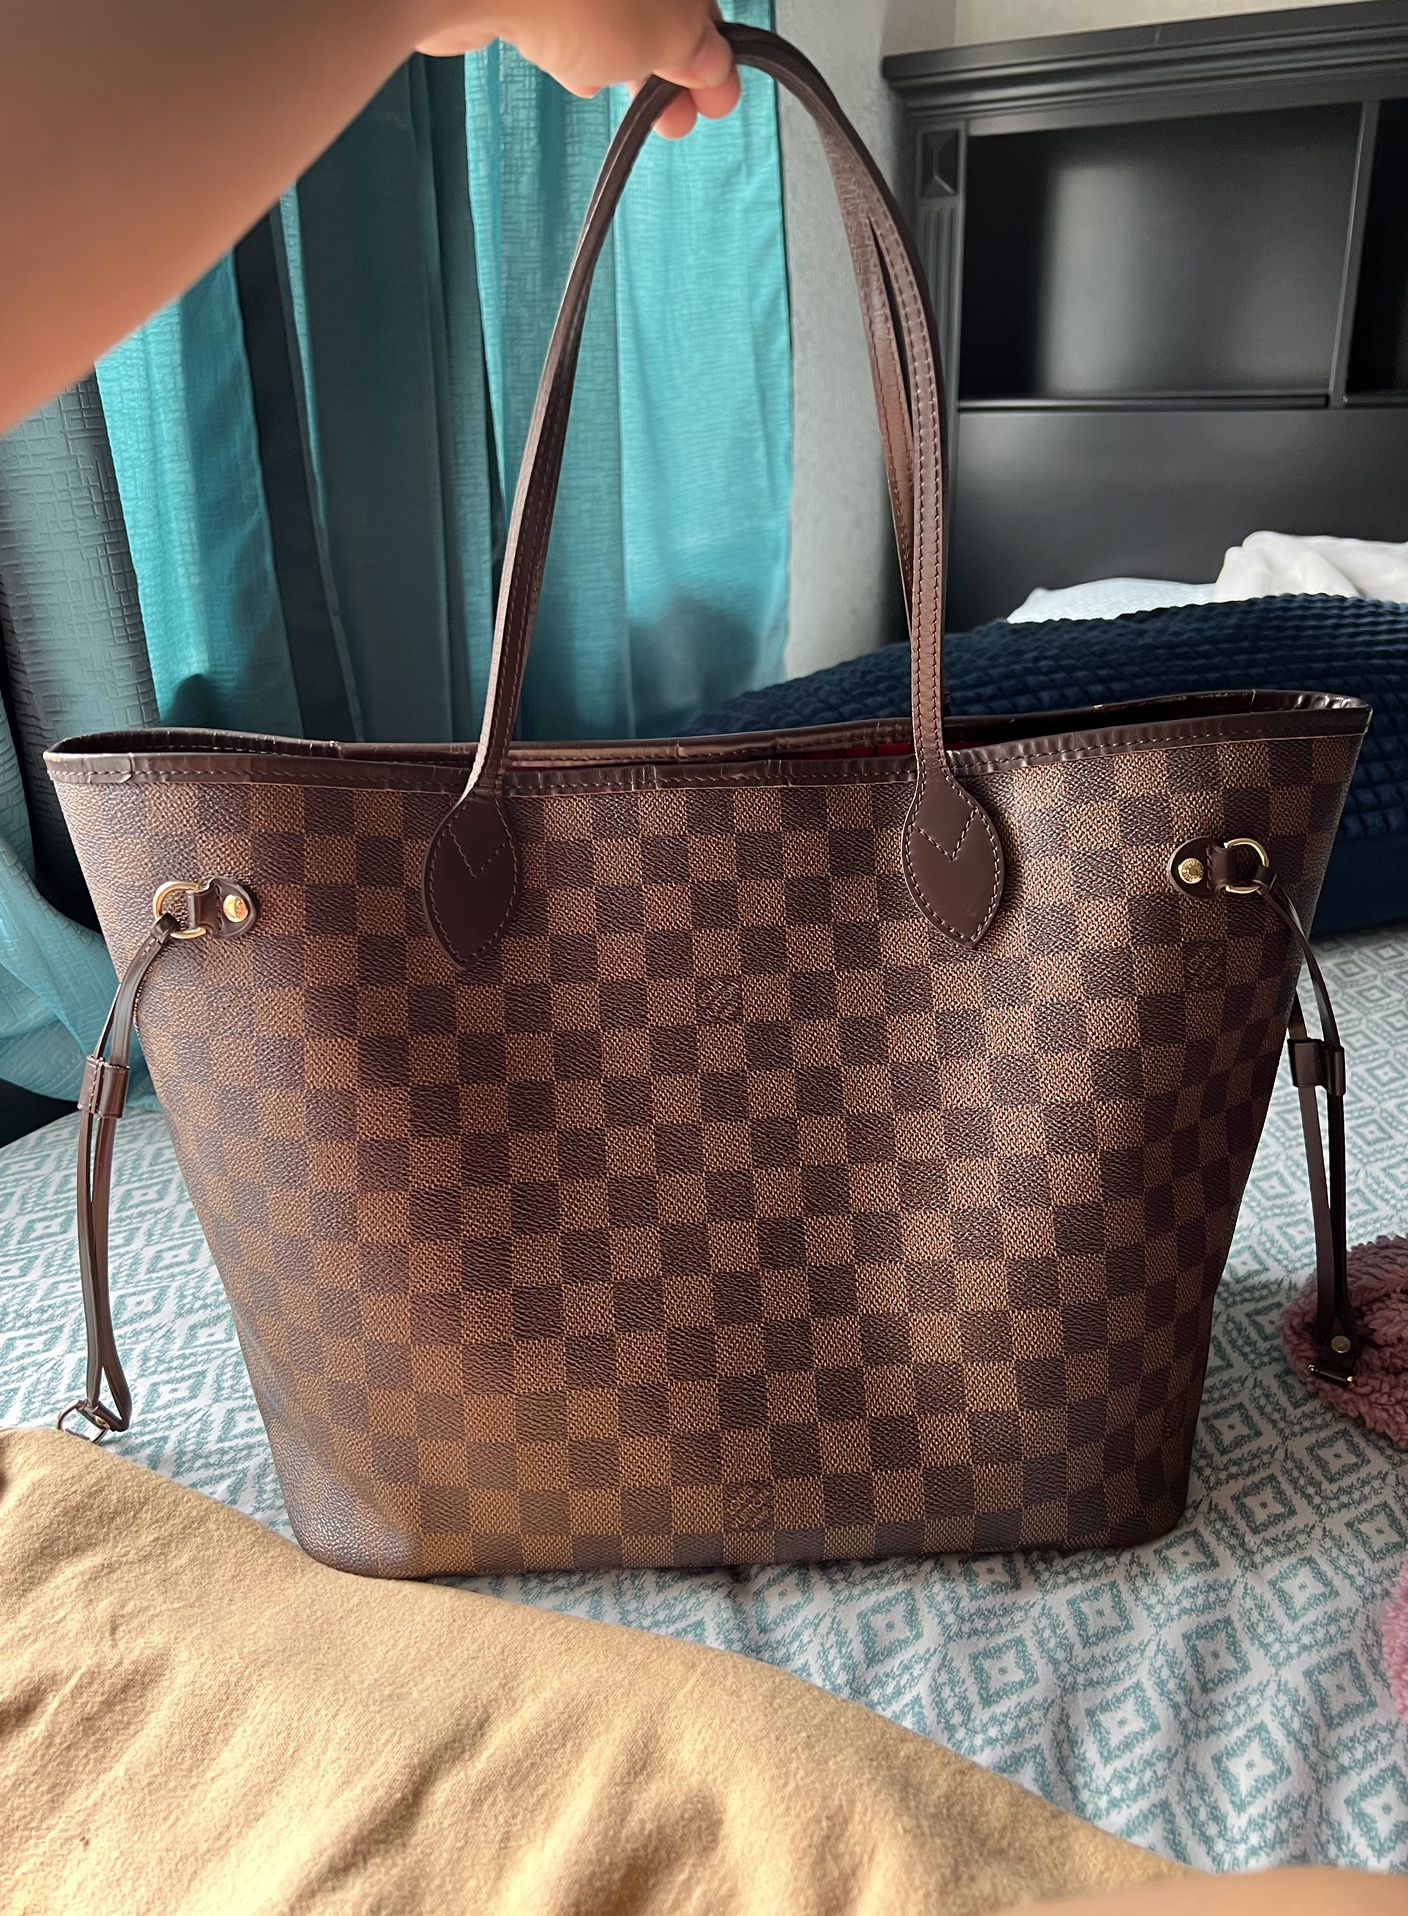 LV NEVERFULL MM DAMIER for Sale in San Diego, CA - OfferUp